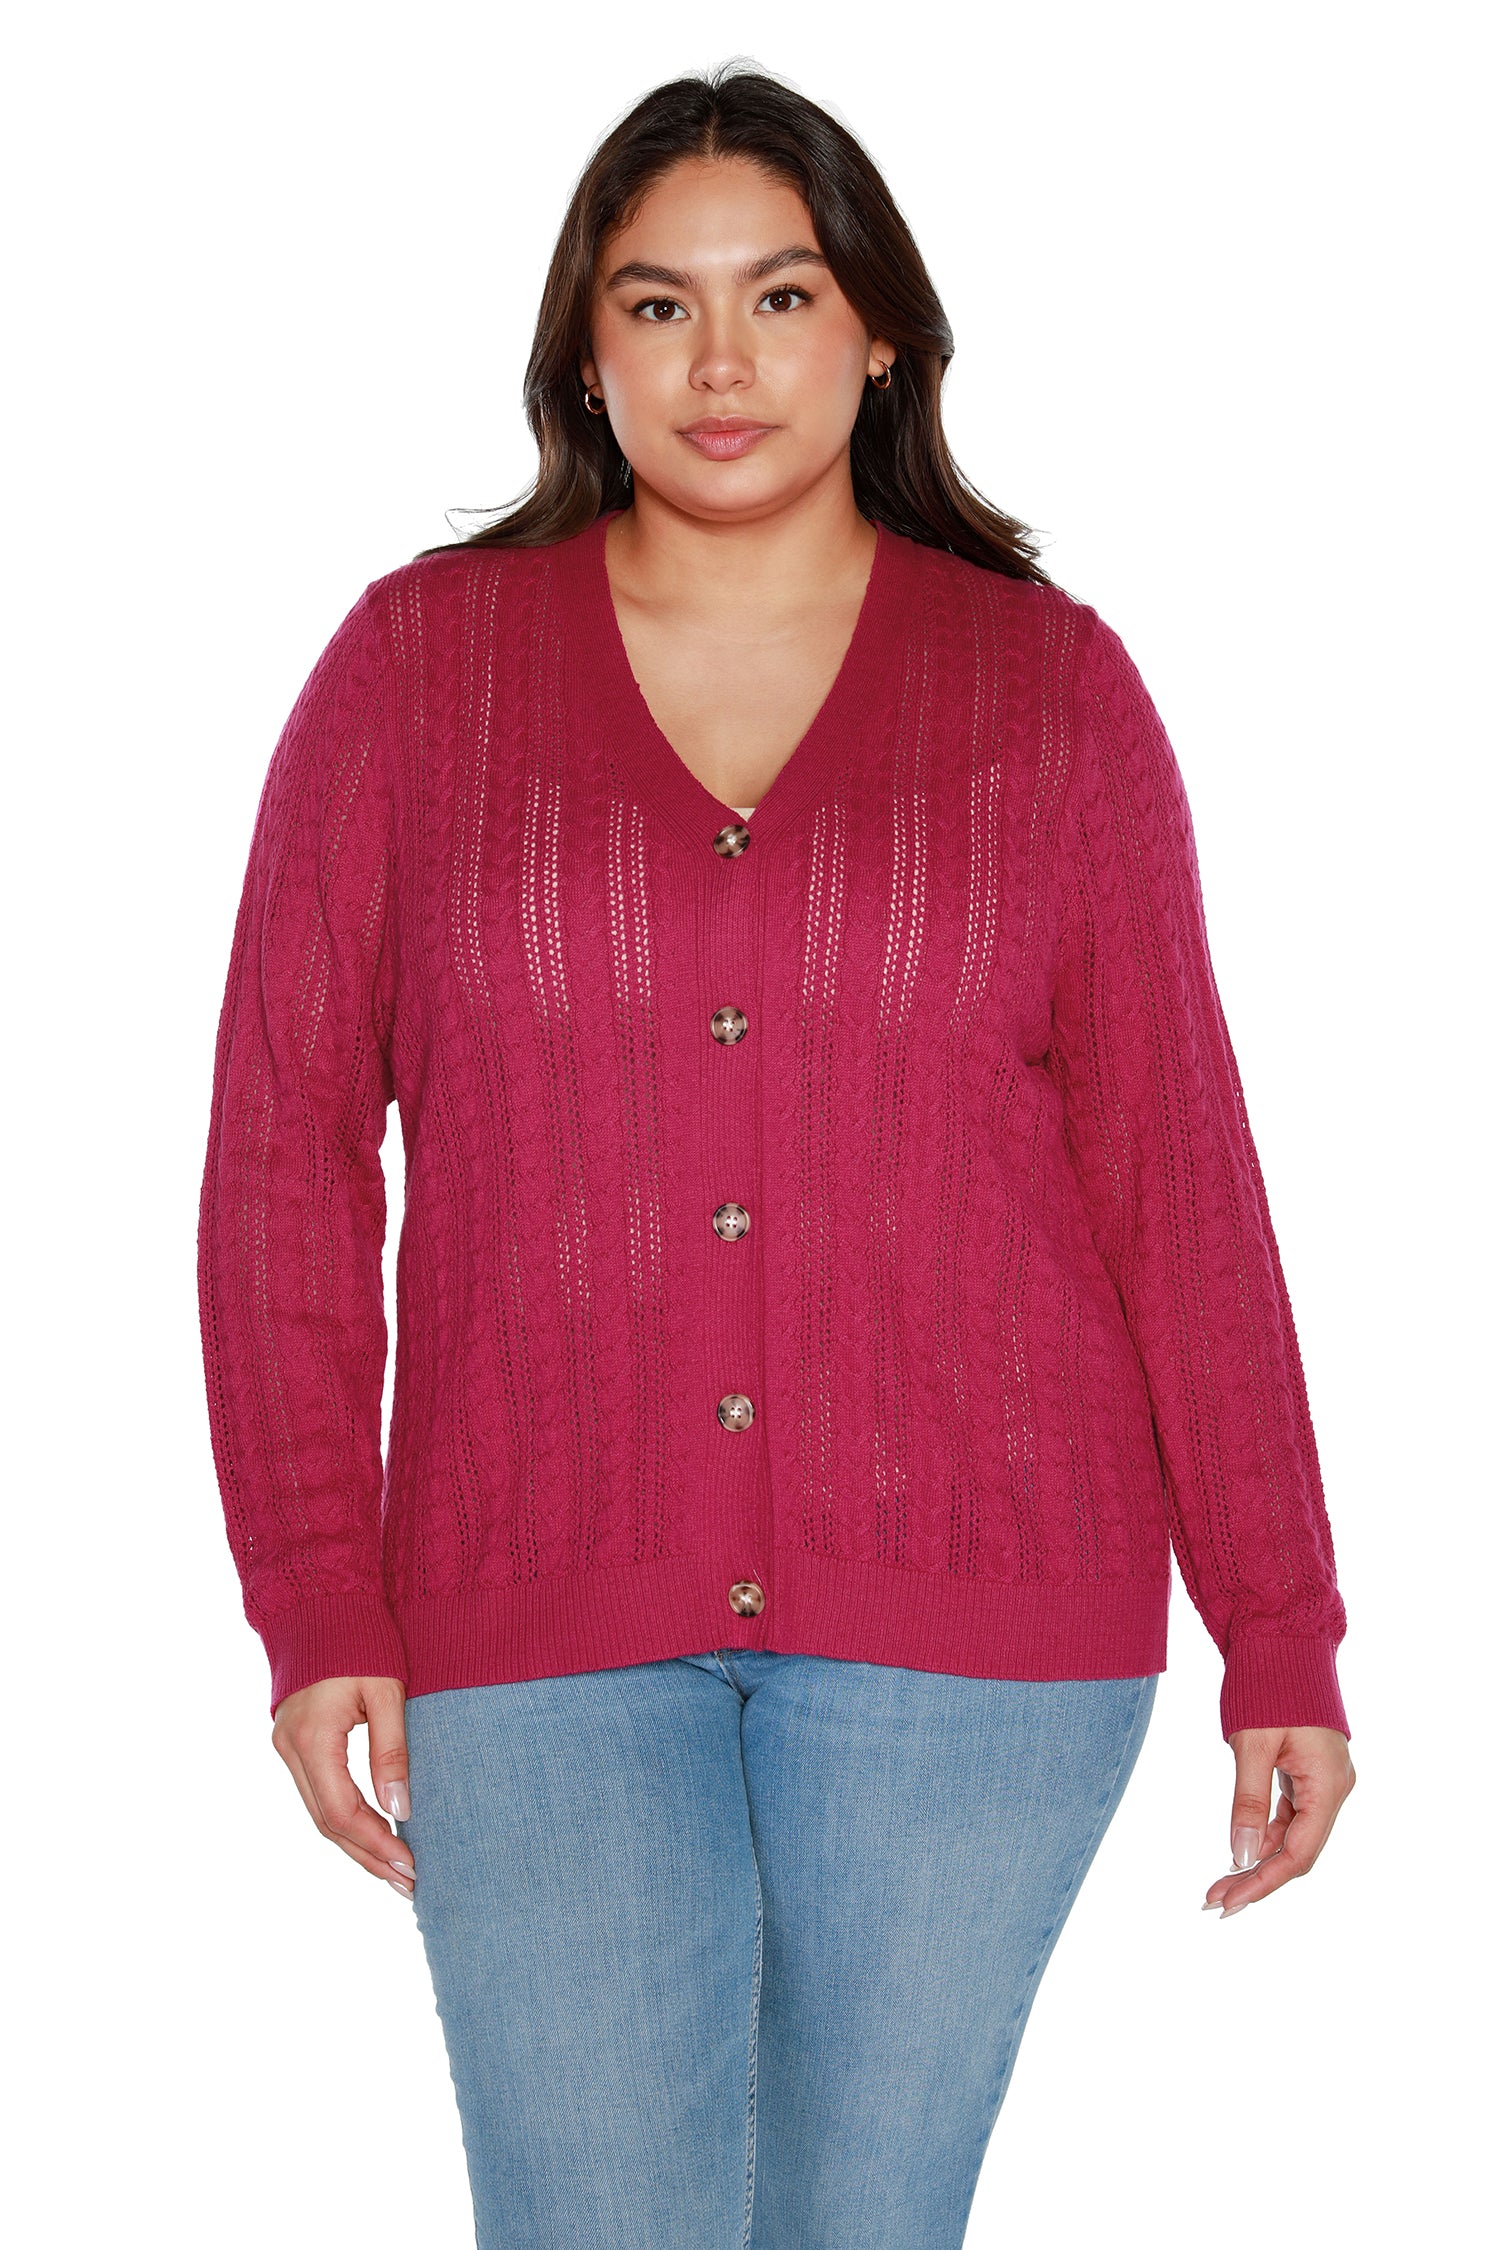 Women’s Lightweight Semi Sheer Cable Knit Button Front Cardigan | Curvy